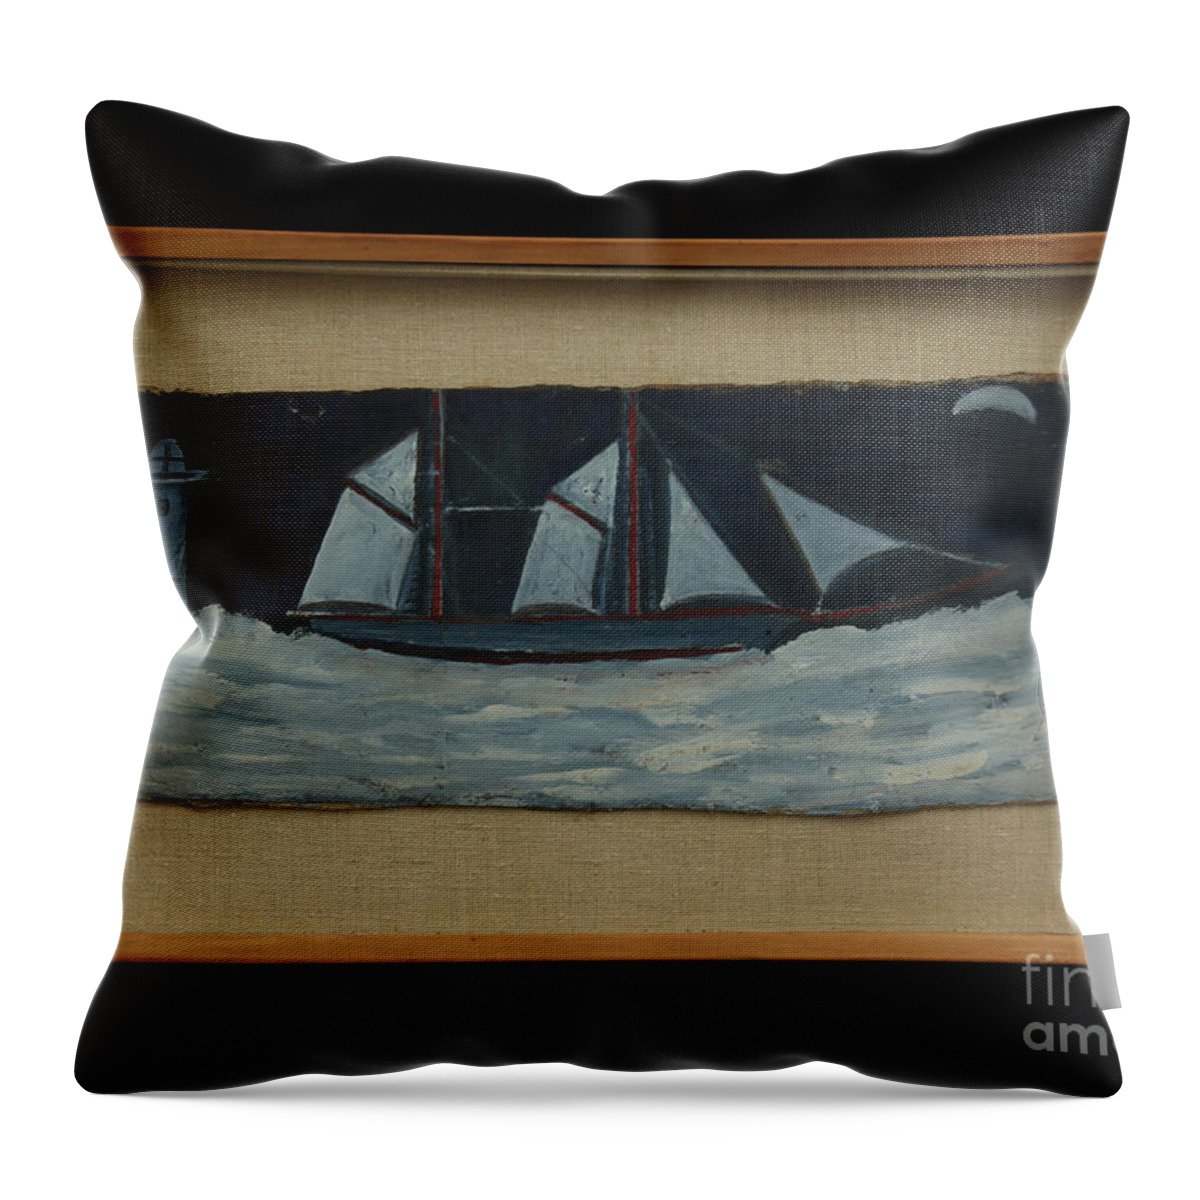 Boat Throw Pillow featuring the painting Trawler Off Cornish Coast, C.1930 by Alfred Wallis